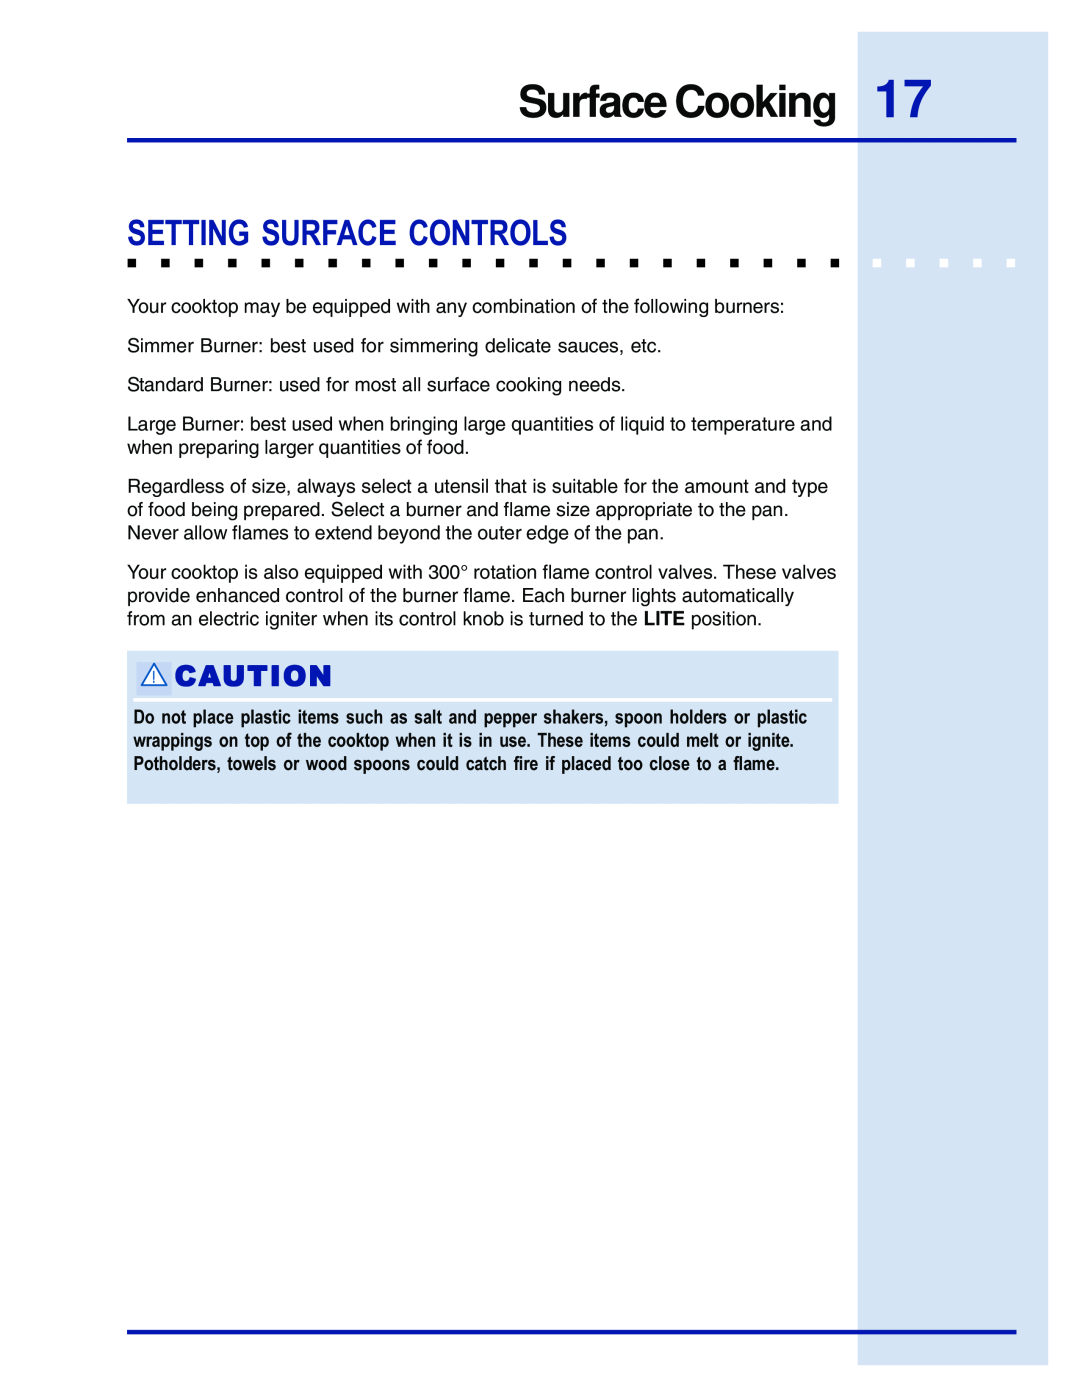 Electrolux E48GC76EPS manual Setting Surface Controls, Surface Cooking 